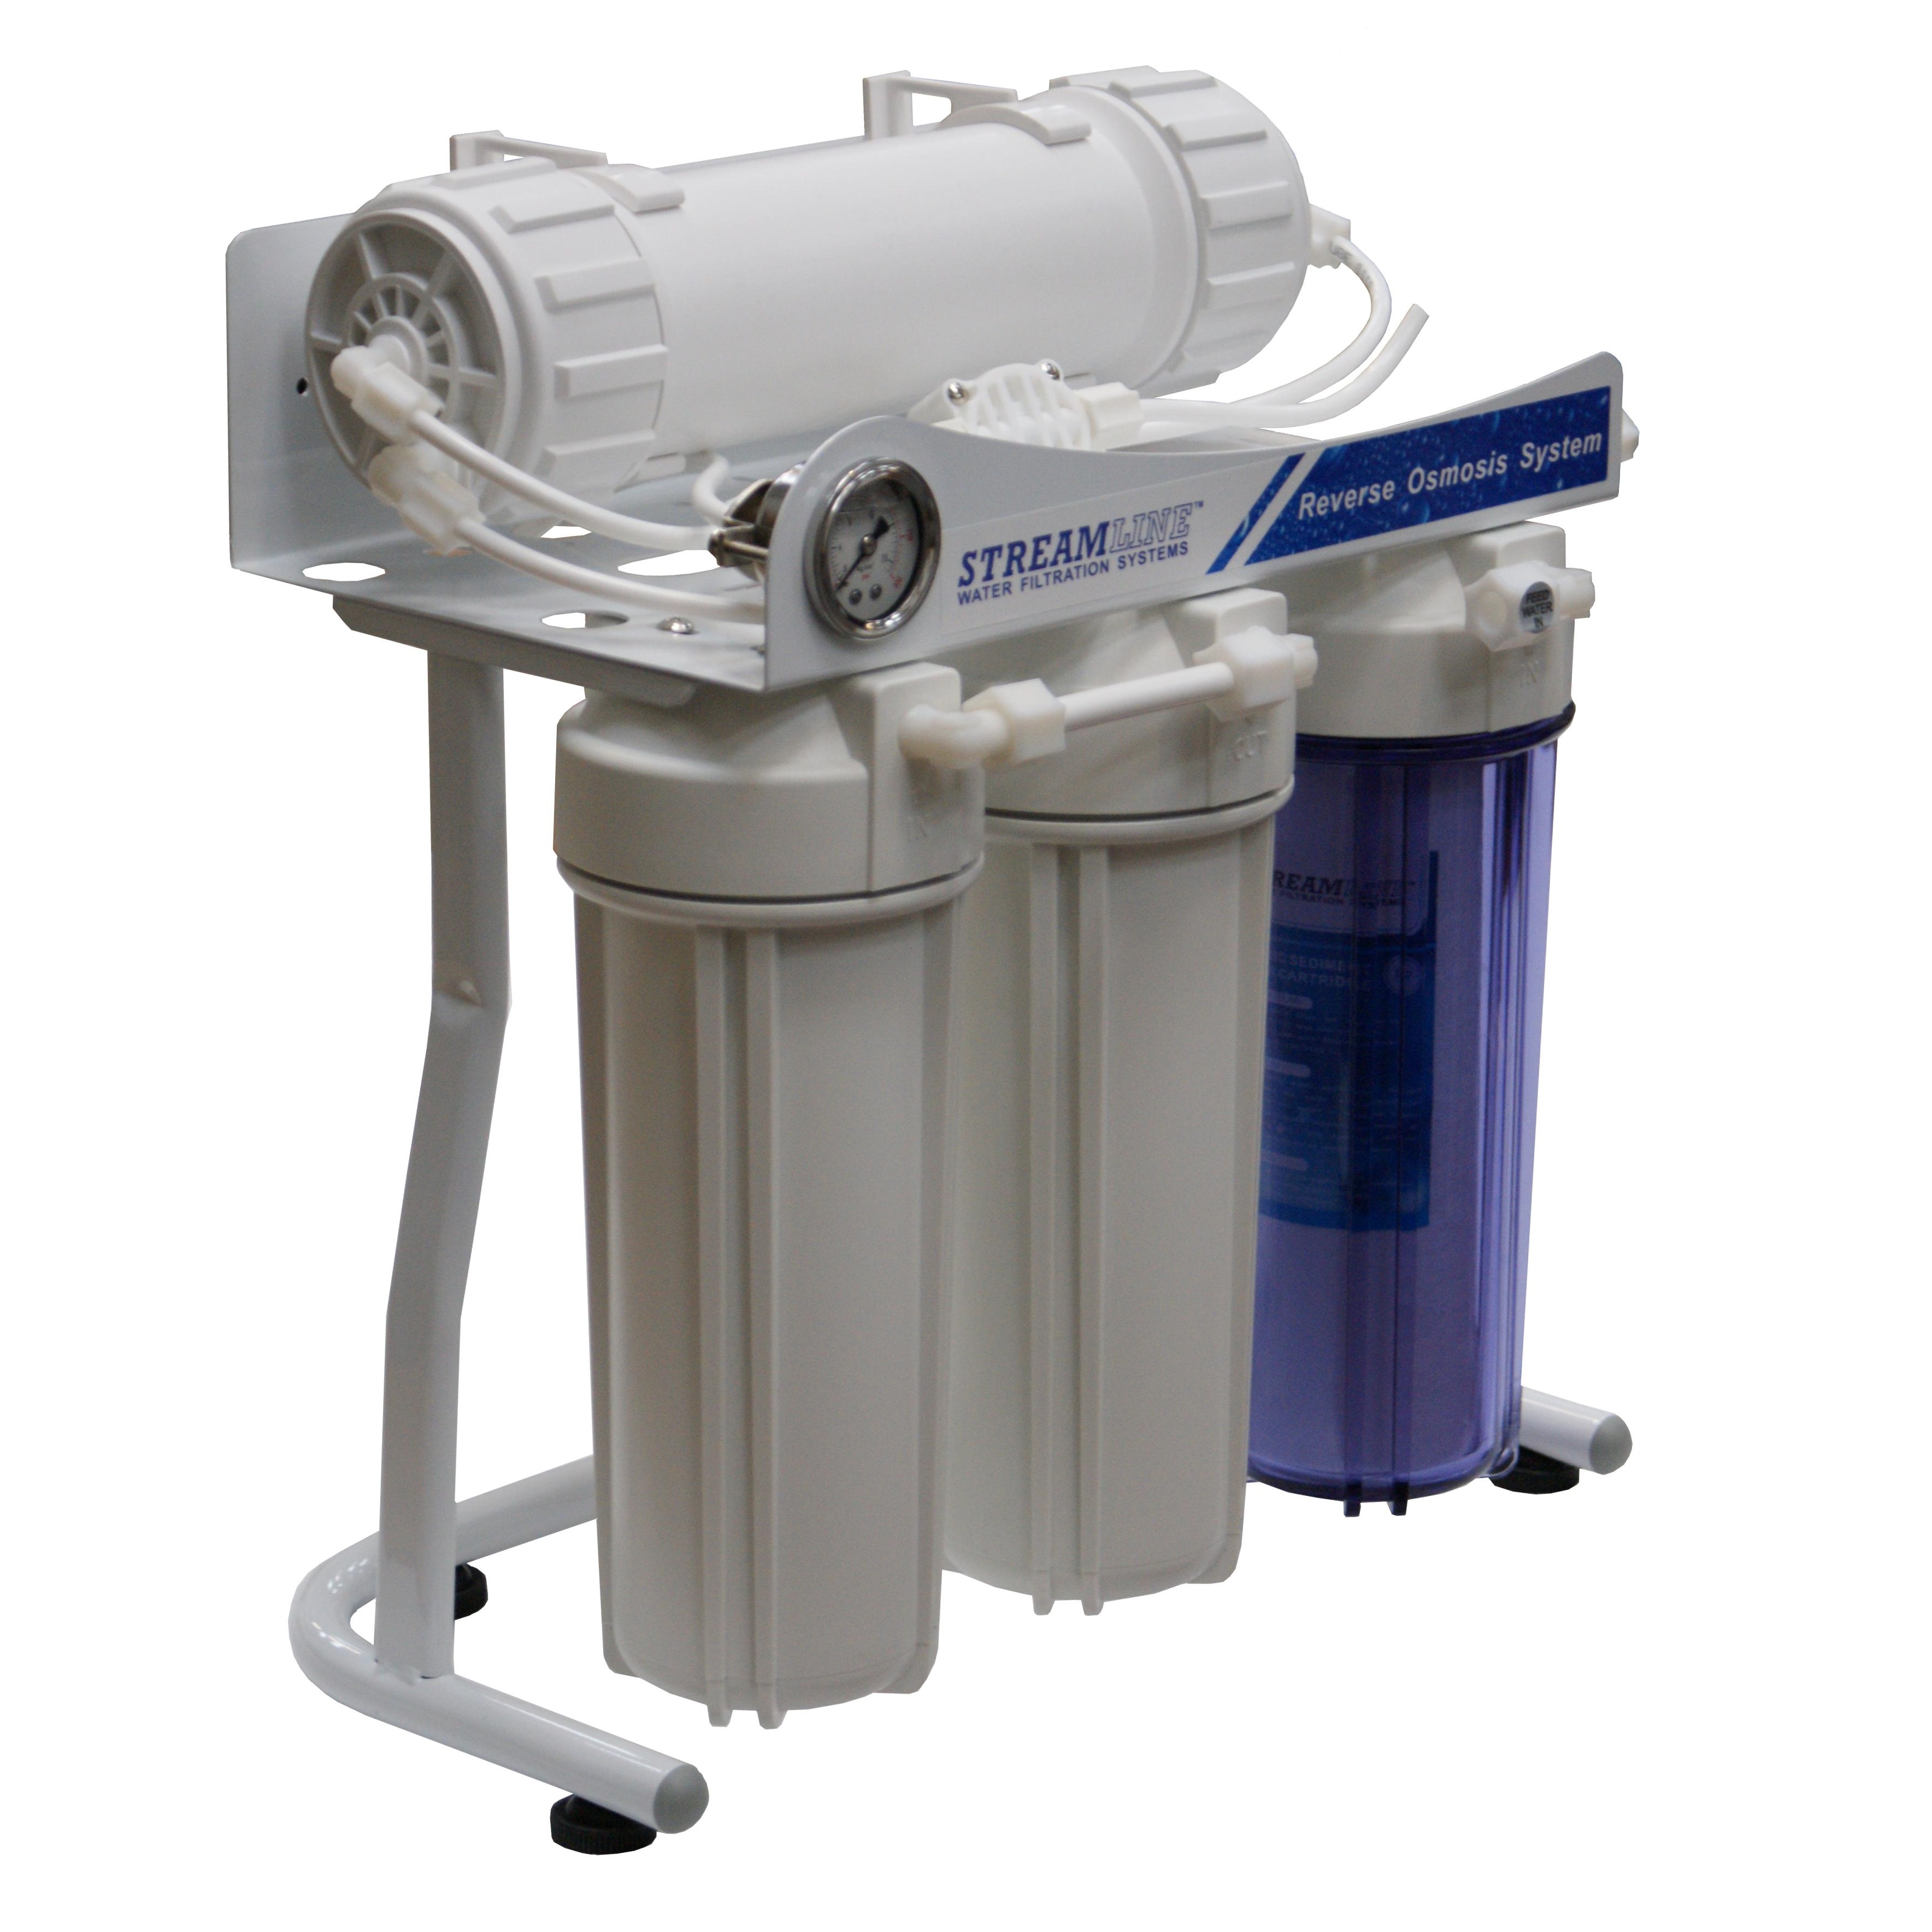 Filterplus 300 reverse osmosis water filtration system